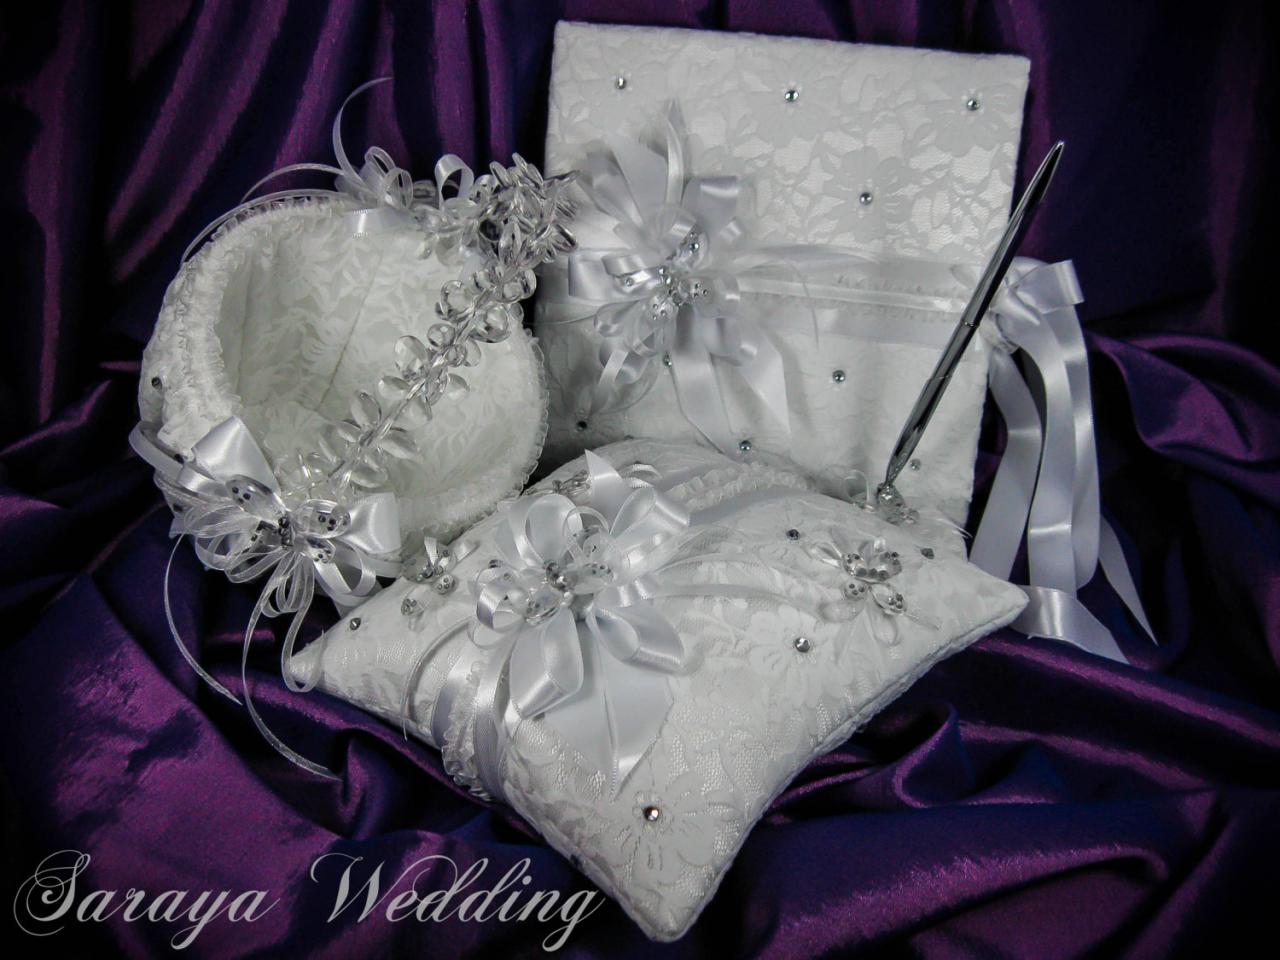 Wedding Set, Guest Book, Flower Girl Basket, Ring Bearer Pillow, White Satin, White Lace, White Ribbons, Crystals And Butterflies